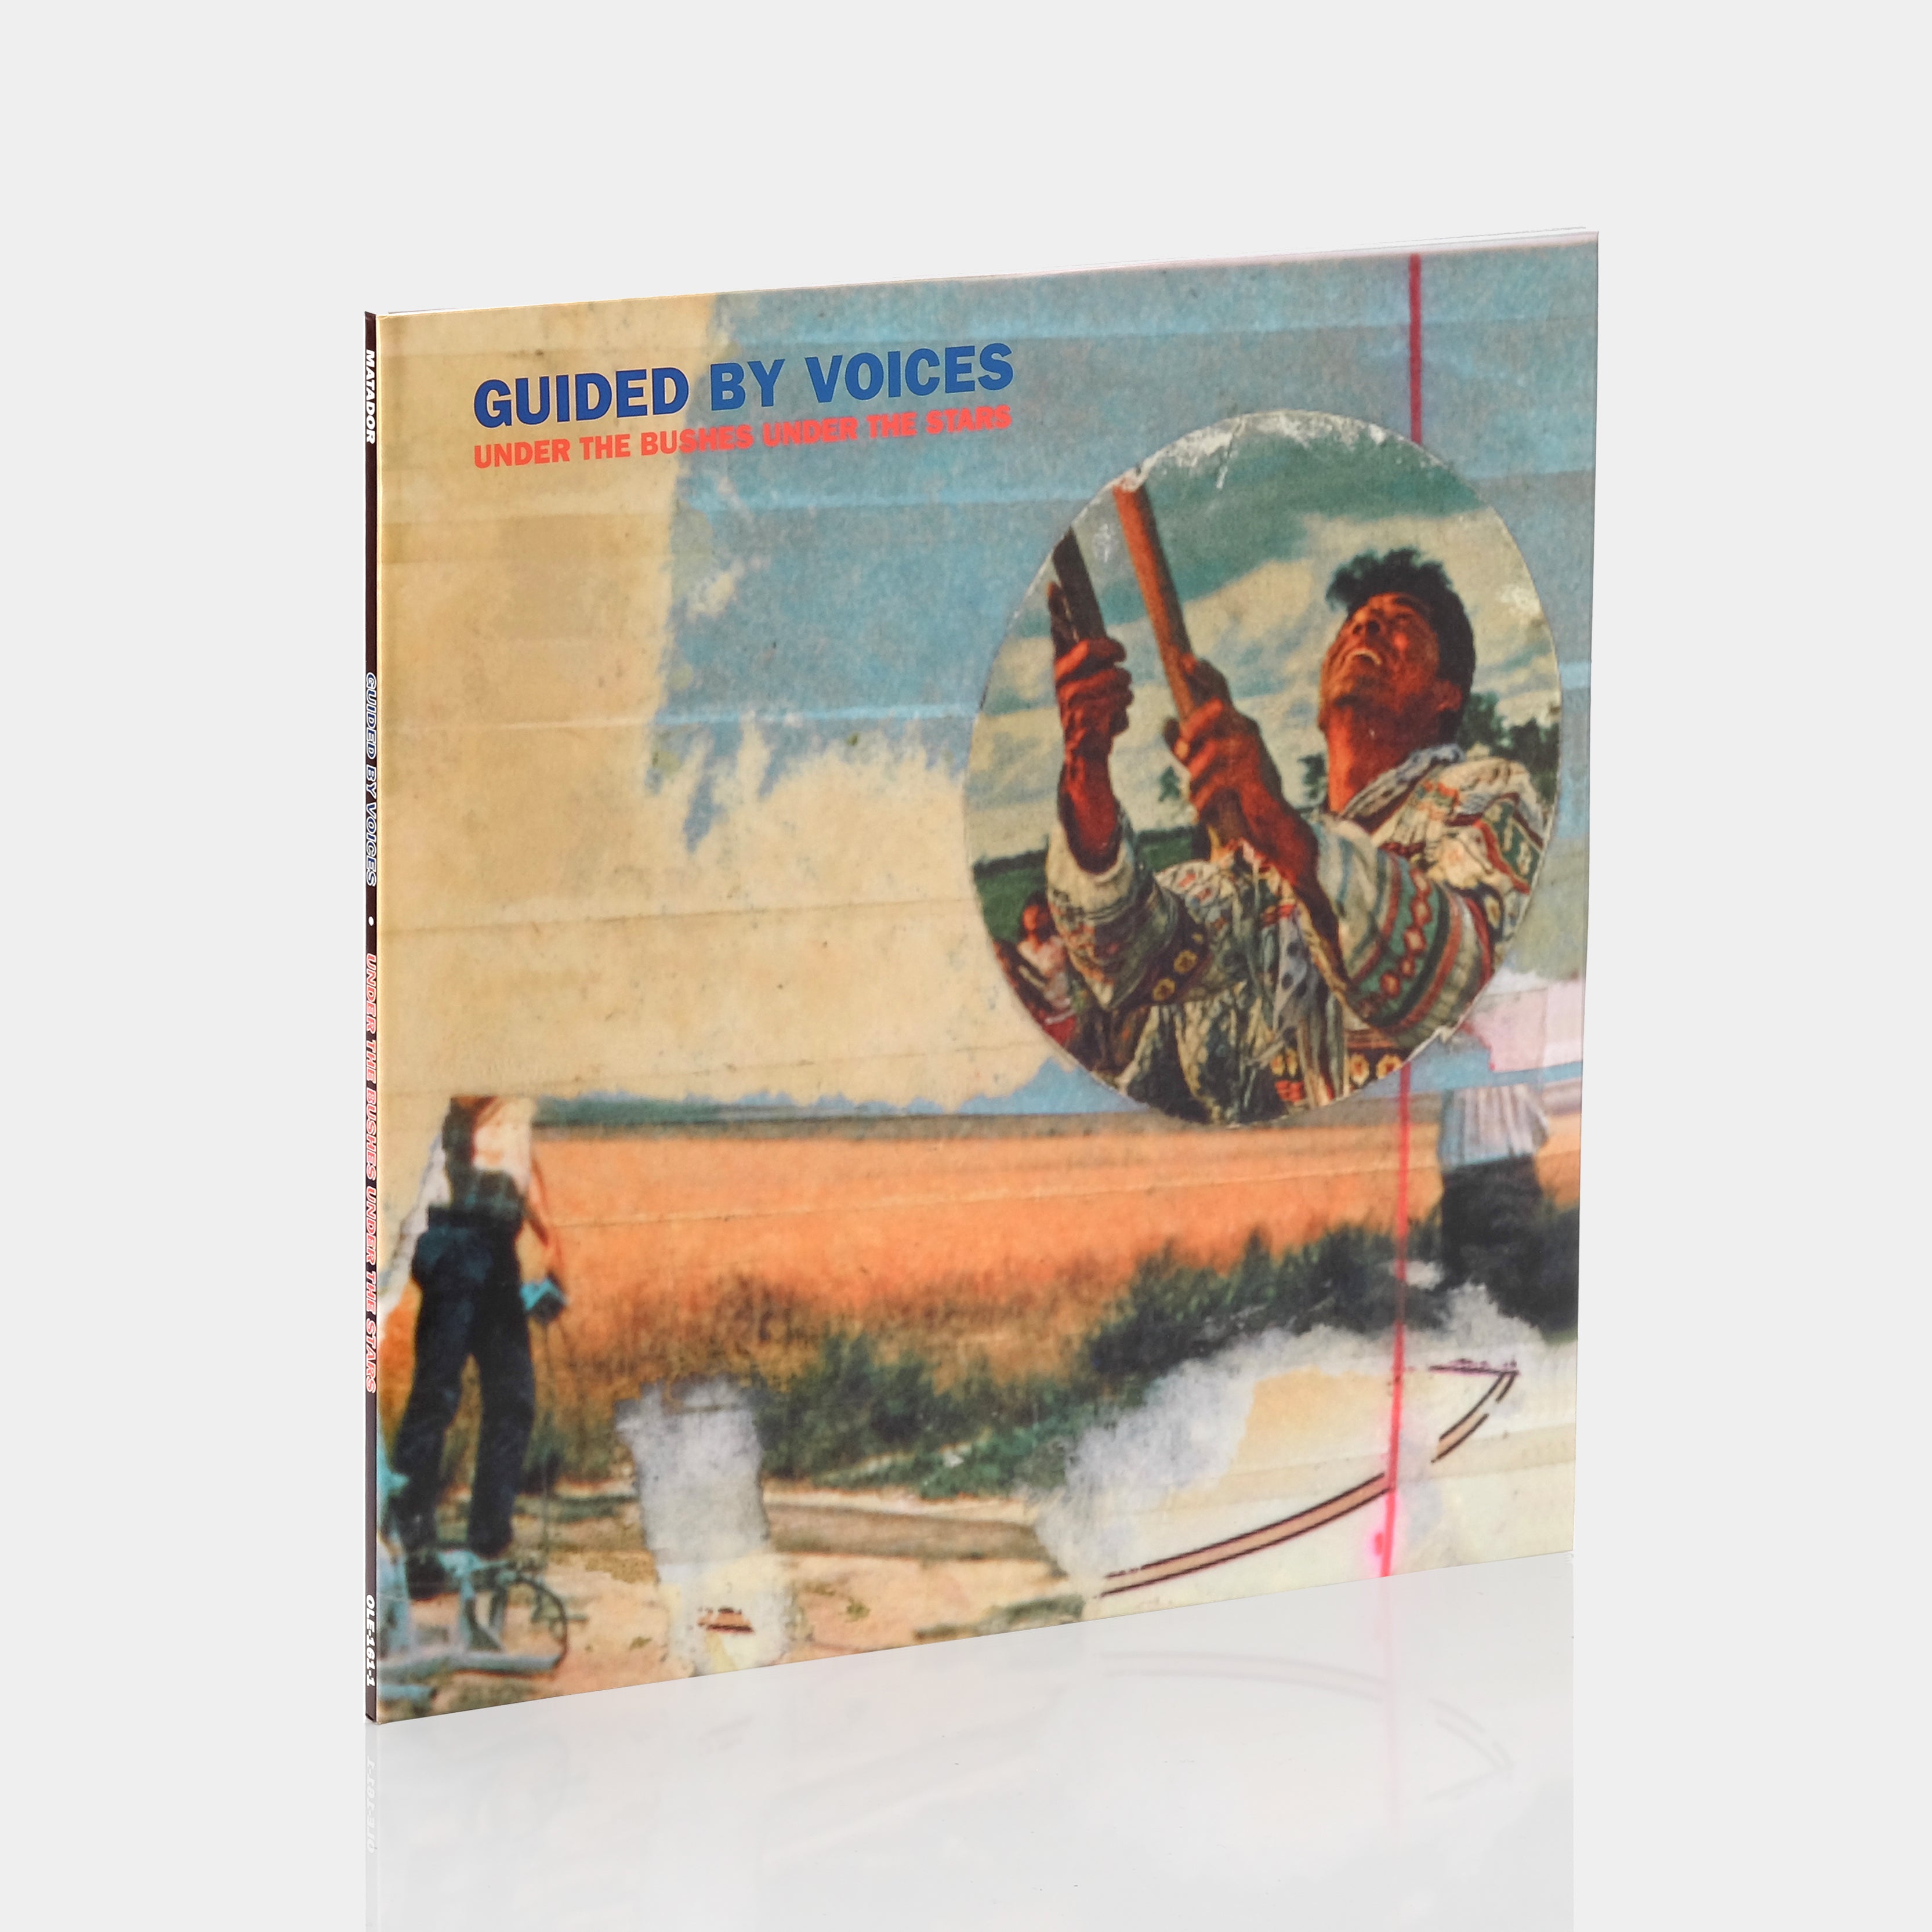 Guided By Voices - Under The Bushes Under The Stars LP Vinyl Record + 12" Single